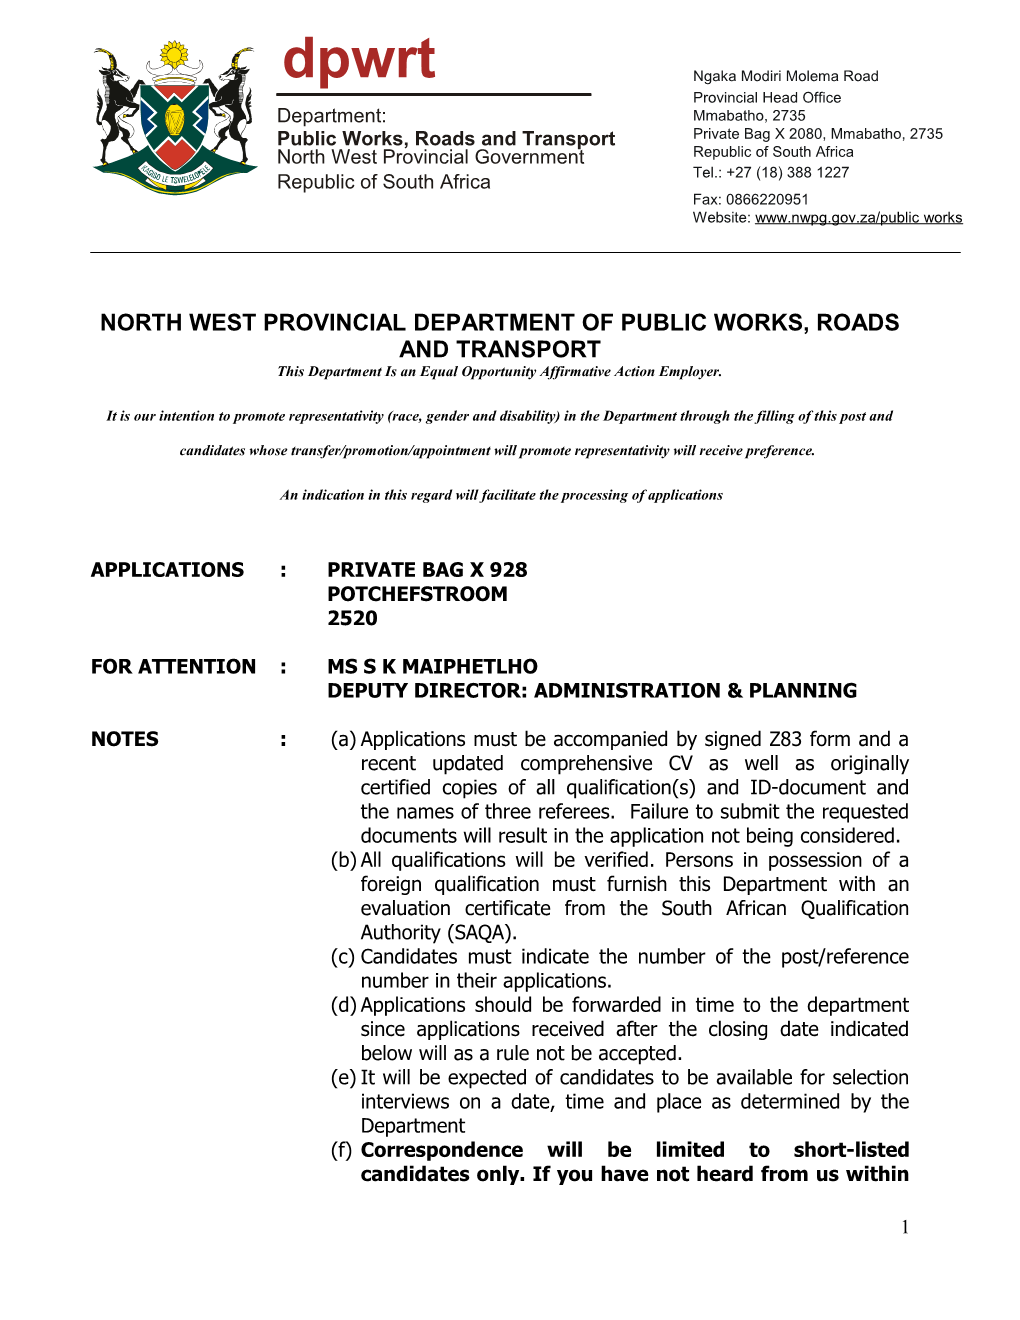 North West Provincial Department of Public Works, Roads and Transport